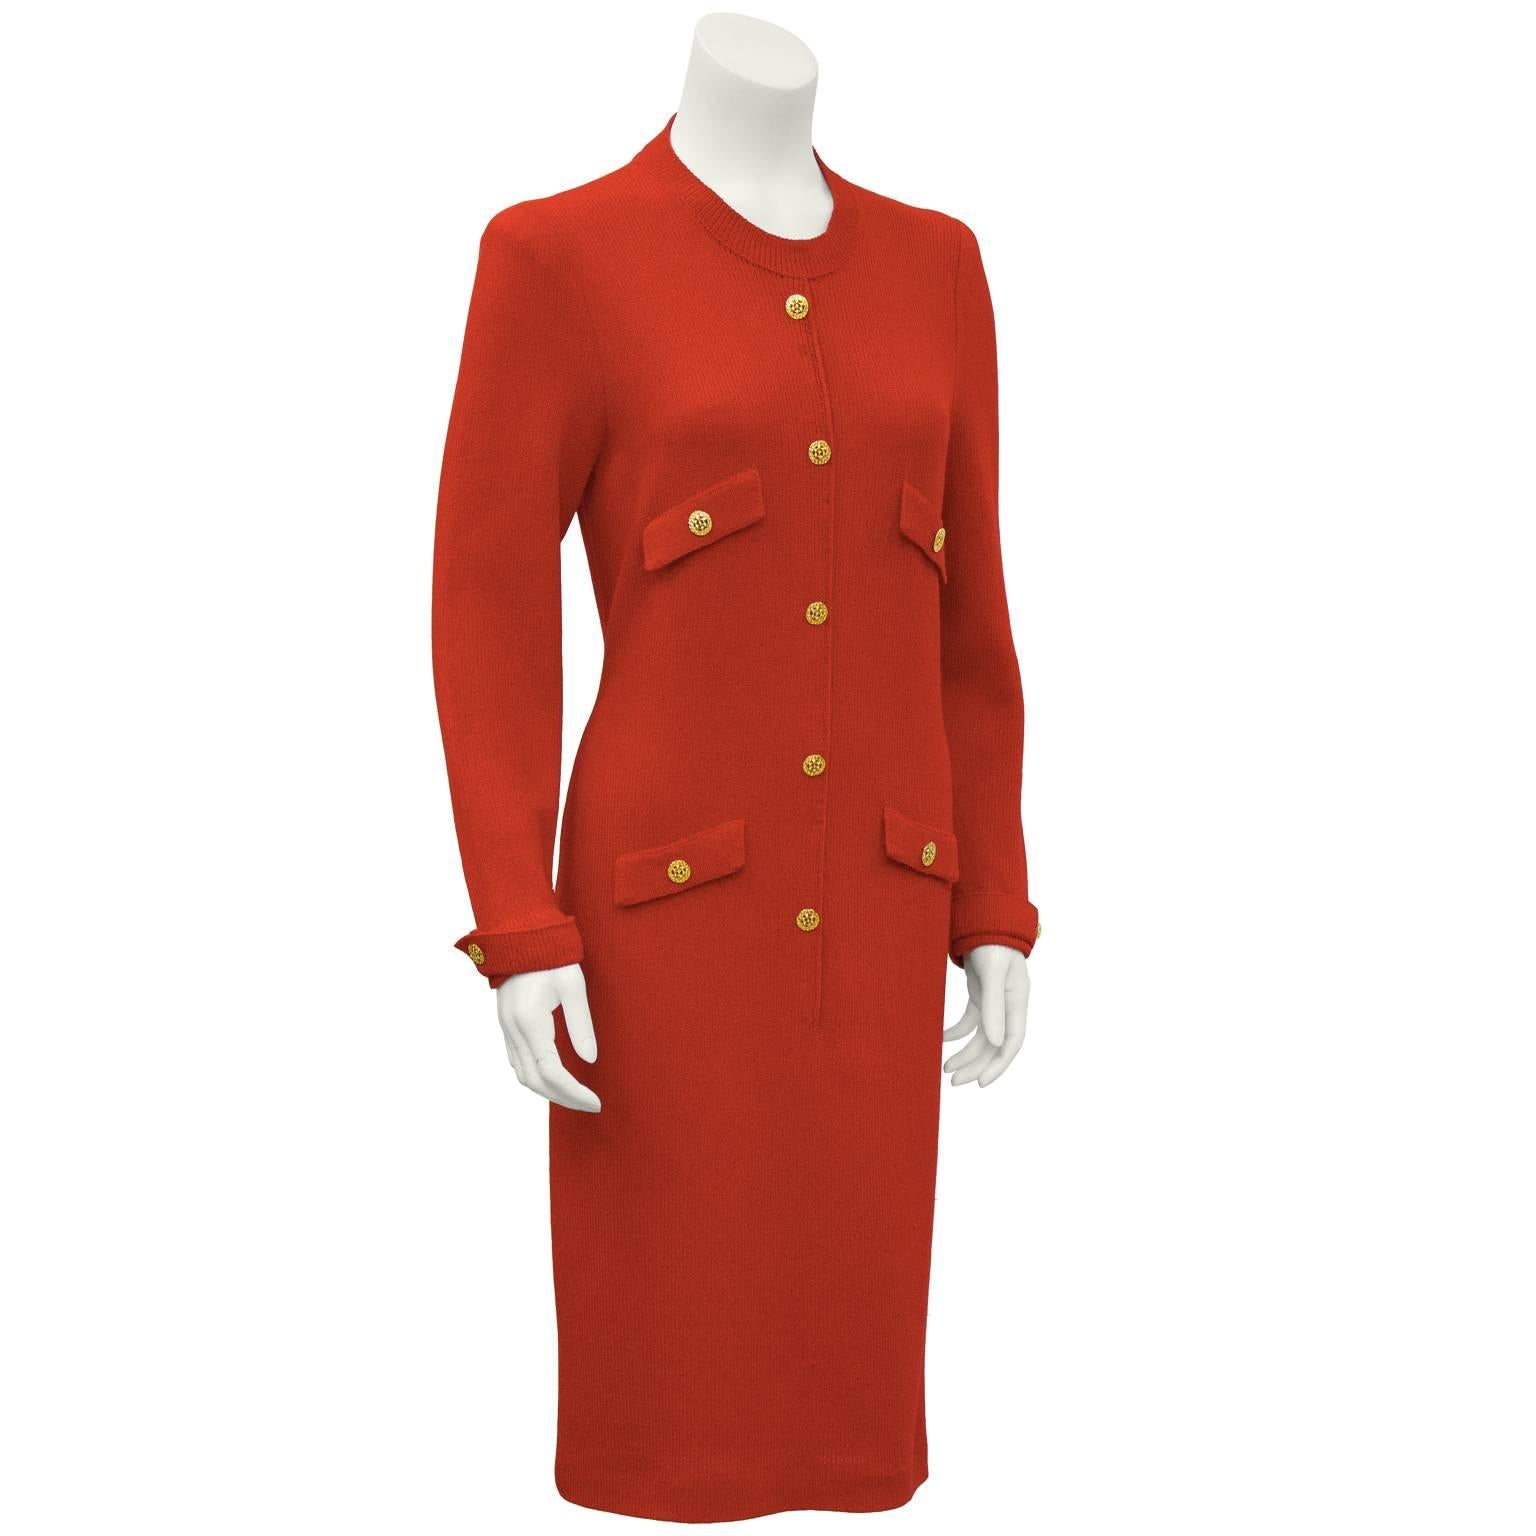 1970's Adolfo signature look red light weight boucle knit day dress. Ribbed collar, faux tabs on the cuffs and fron pocket flaps. Lots of gold plated buttons add detail to this simple back zip dress. Fits like a US size 8-10. Dry cleaned and ready